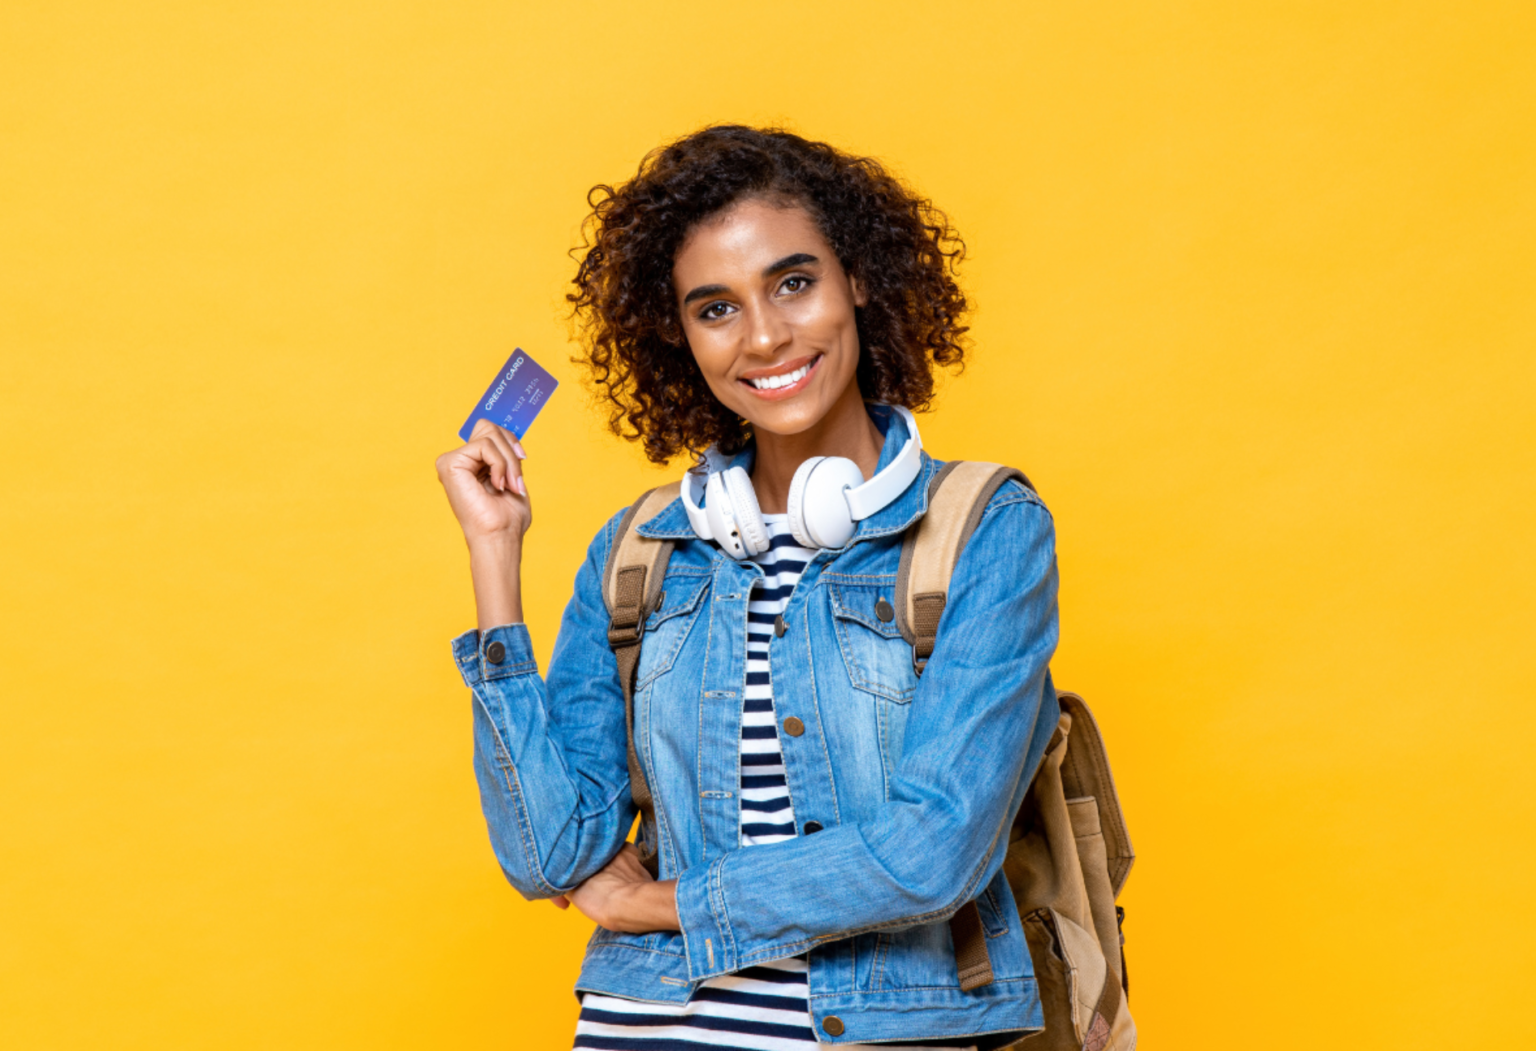 woman holding a credit card